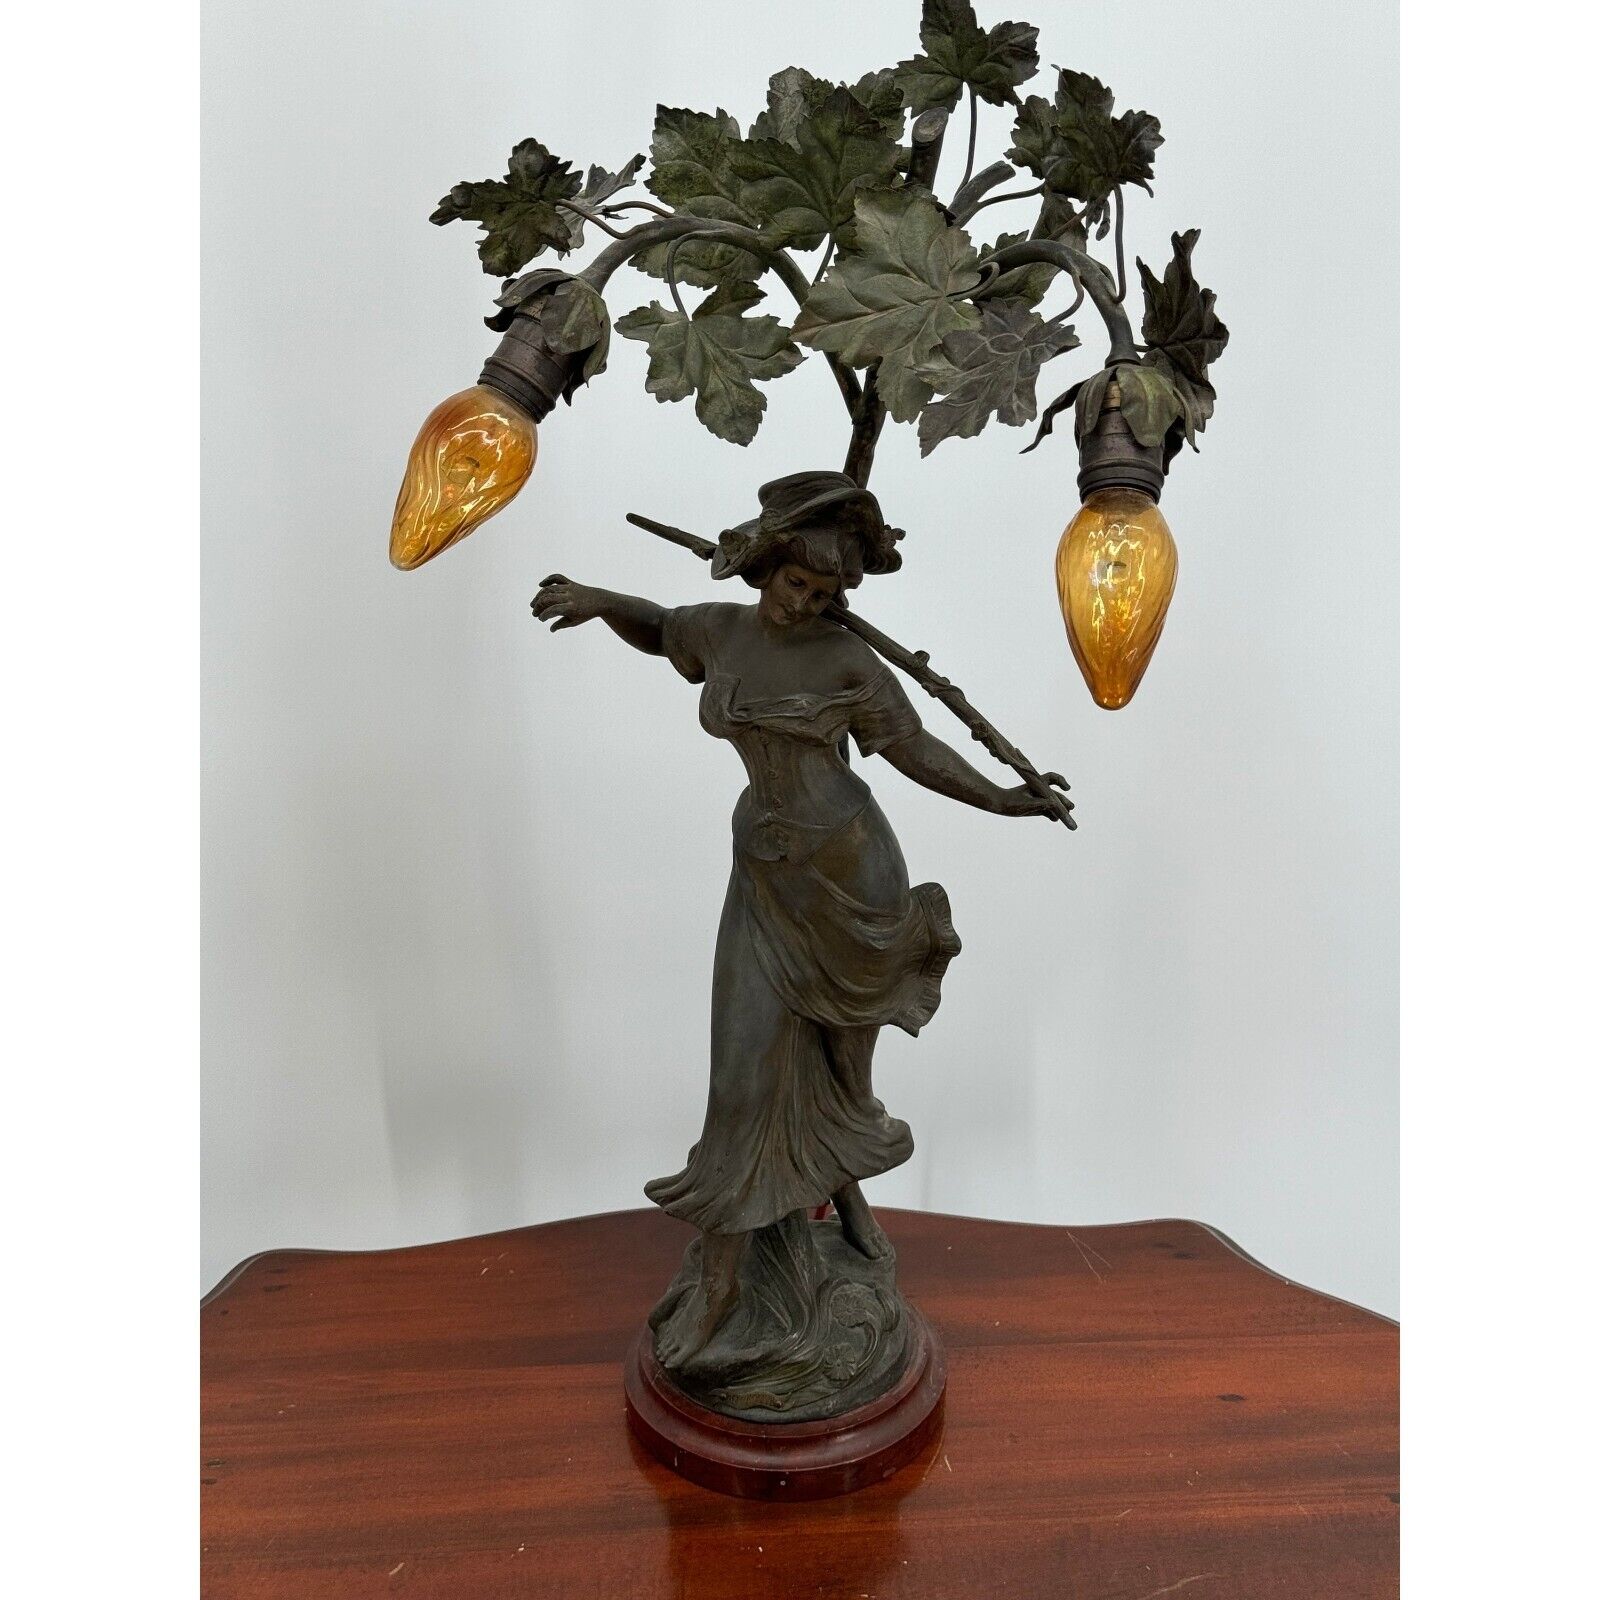 Antique French Spelter Bronze Art Nouveau Newel Post Lamp Lady with Flowers